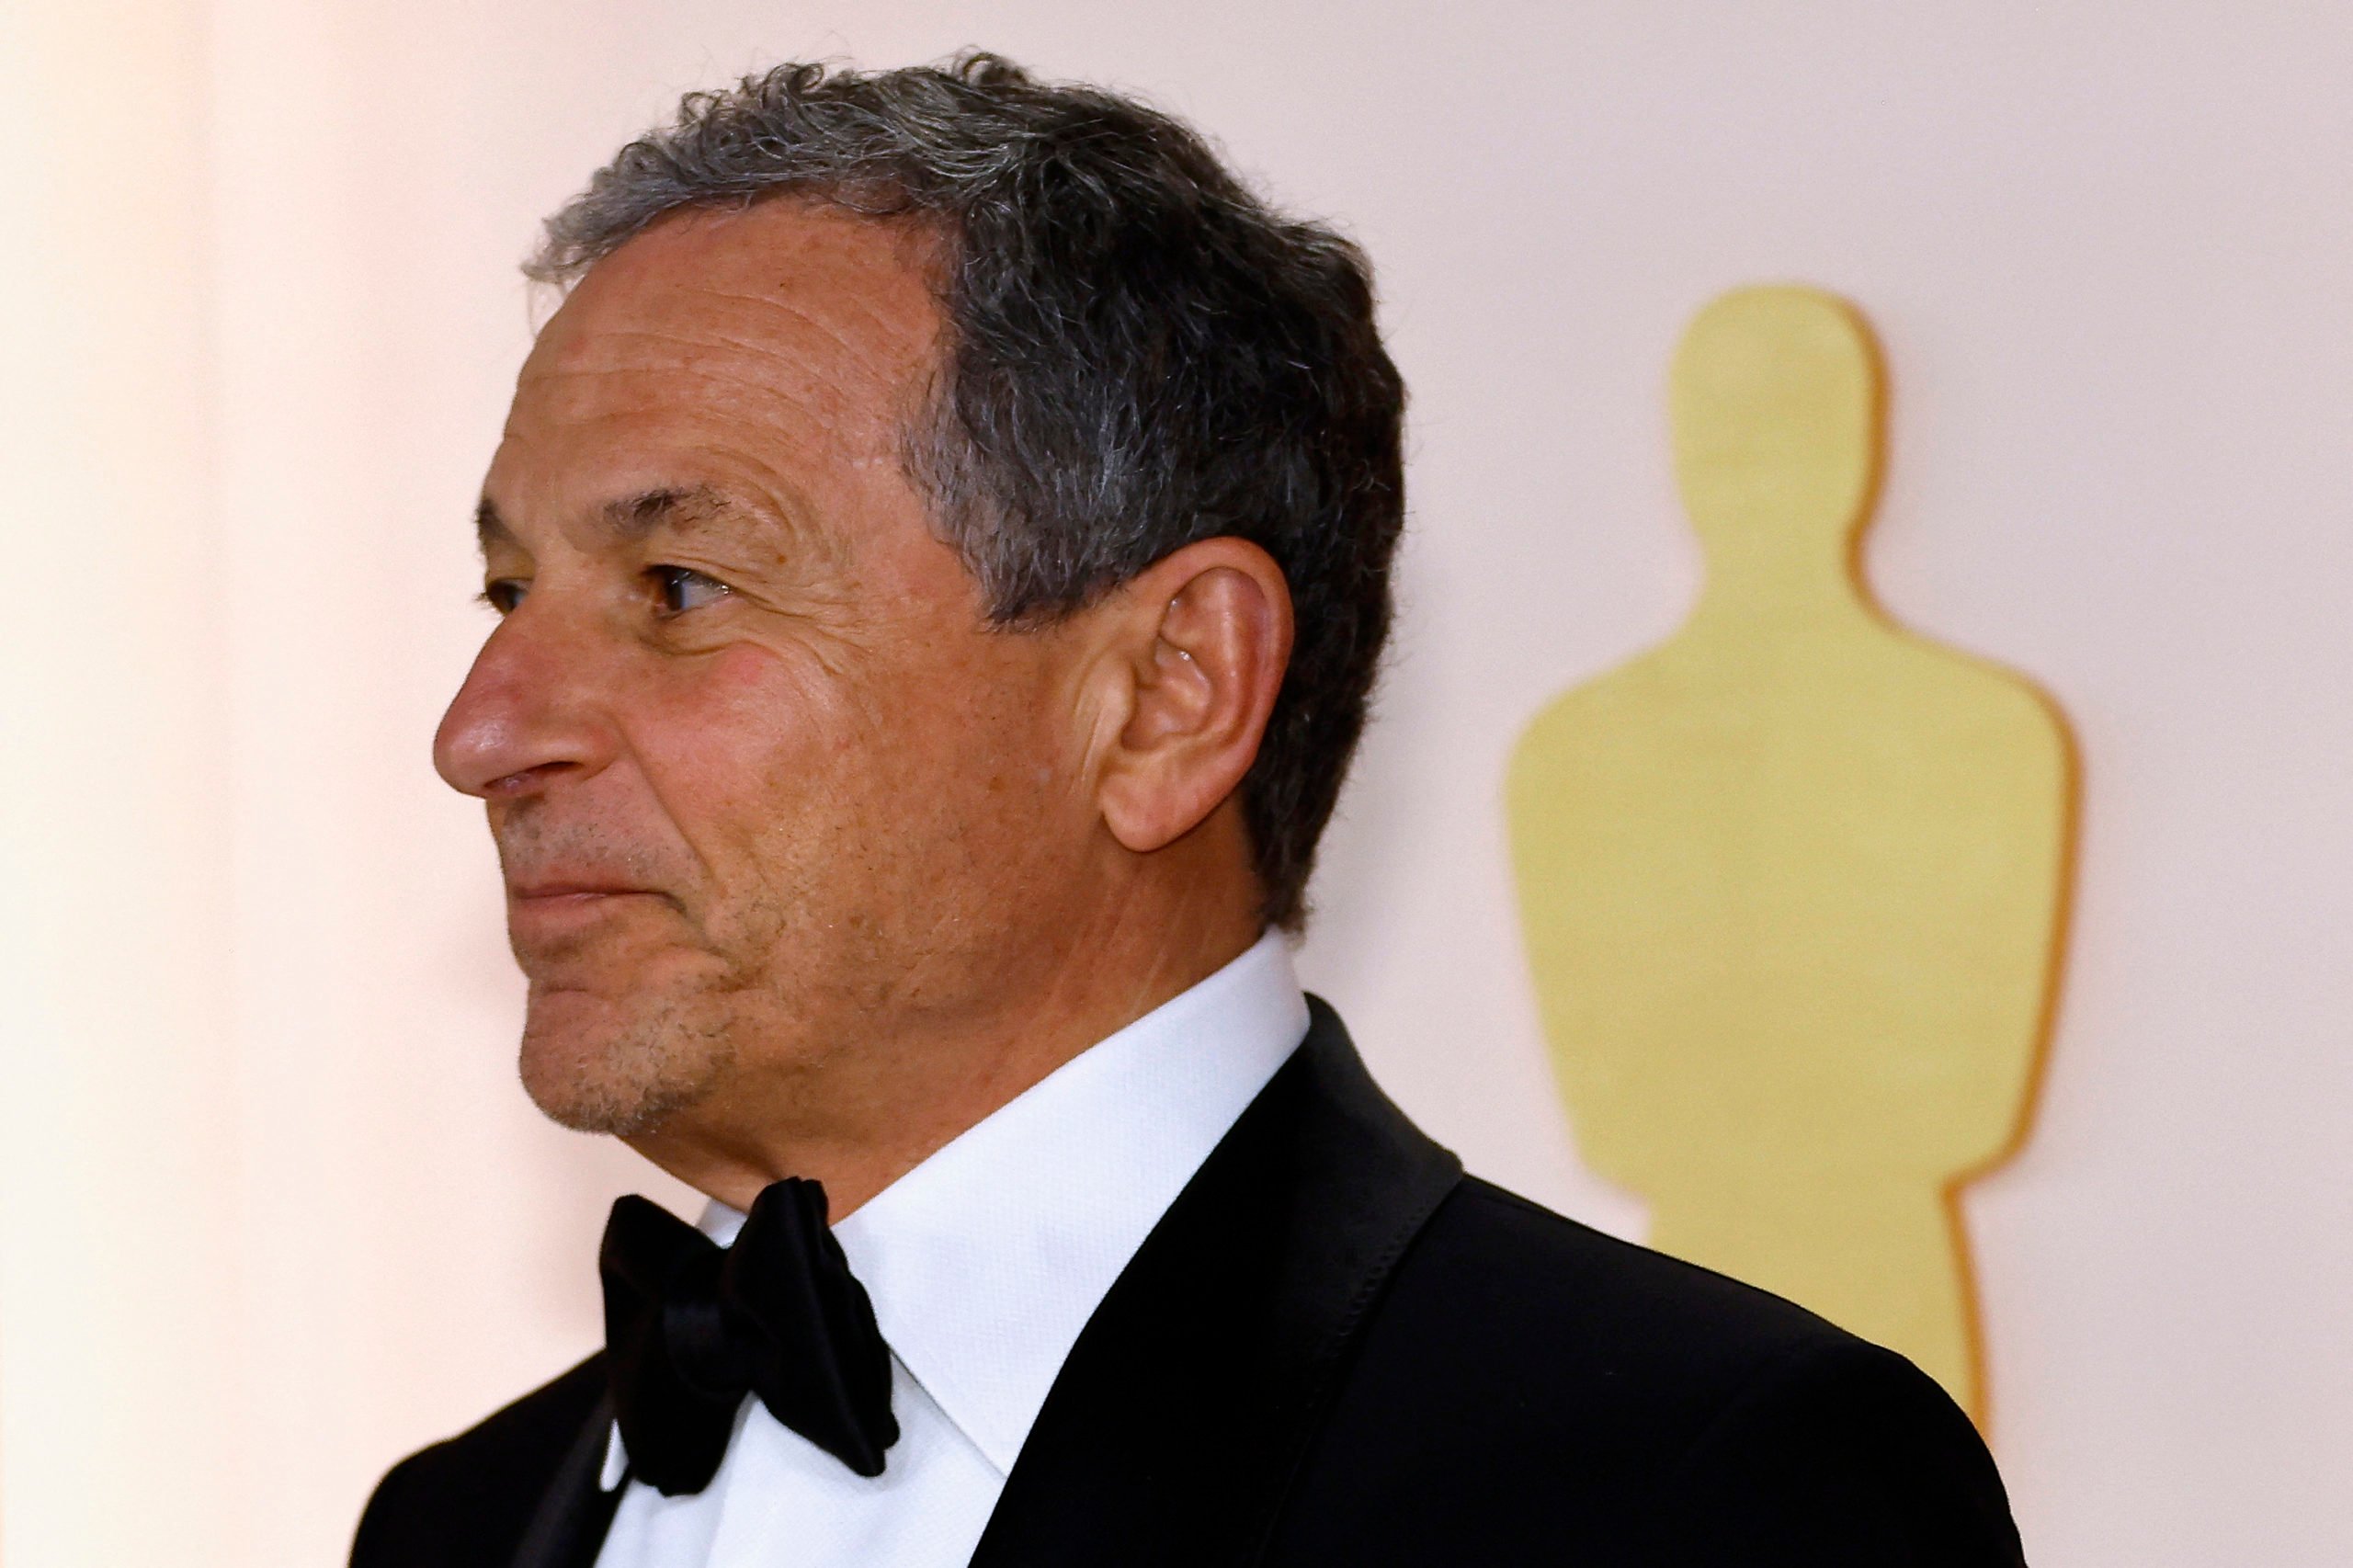 Walt Disney Co. CEO Bob Iger poses on the champagne-colored red carpet during the Oscars arrivals at the 95th Academy Awards in Hollywood, Los Angeles, California, U.S., March 12, 2023. REUTERS/Eric Gaillard